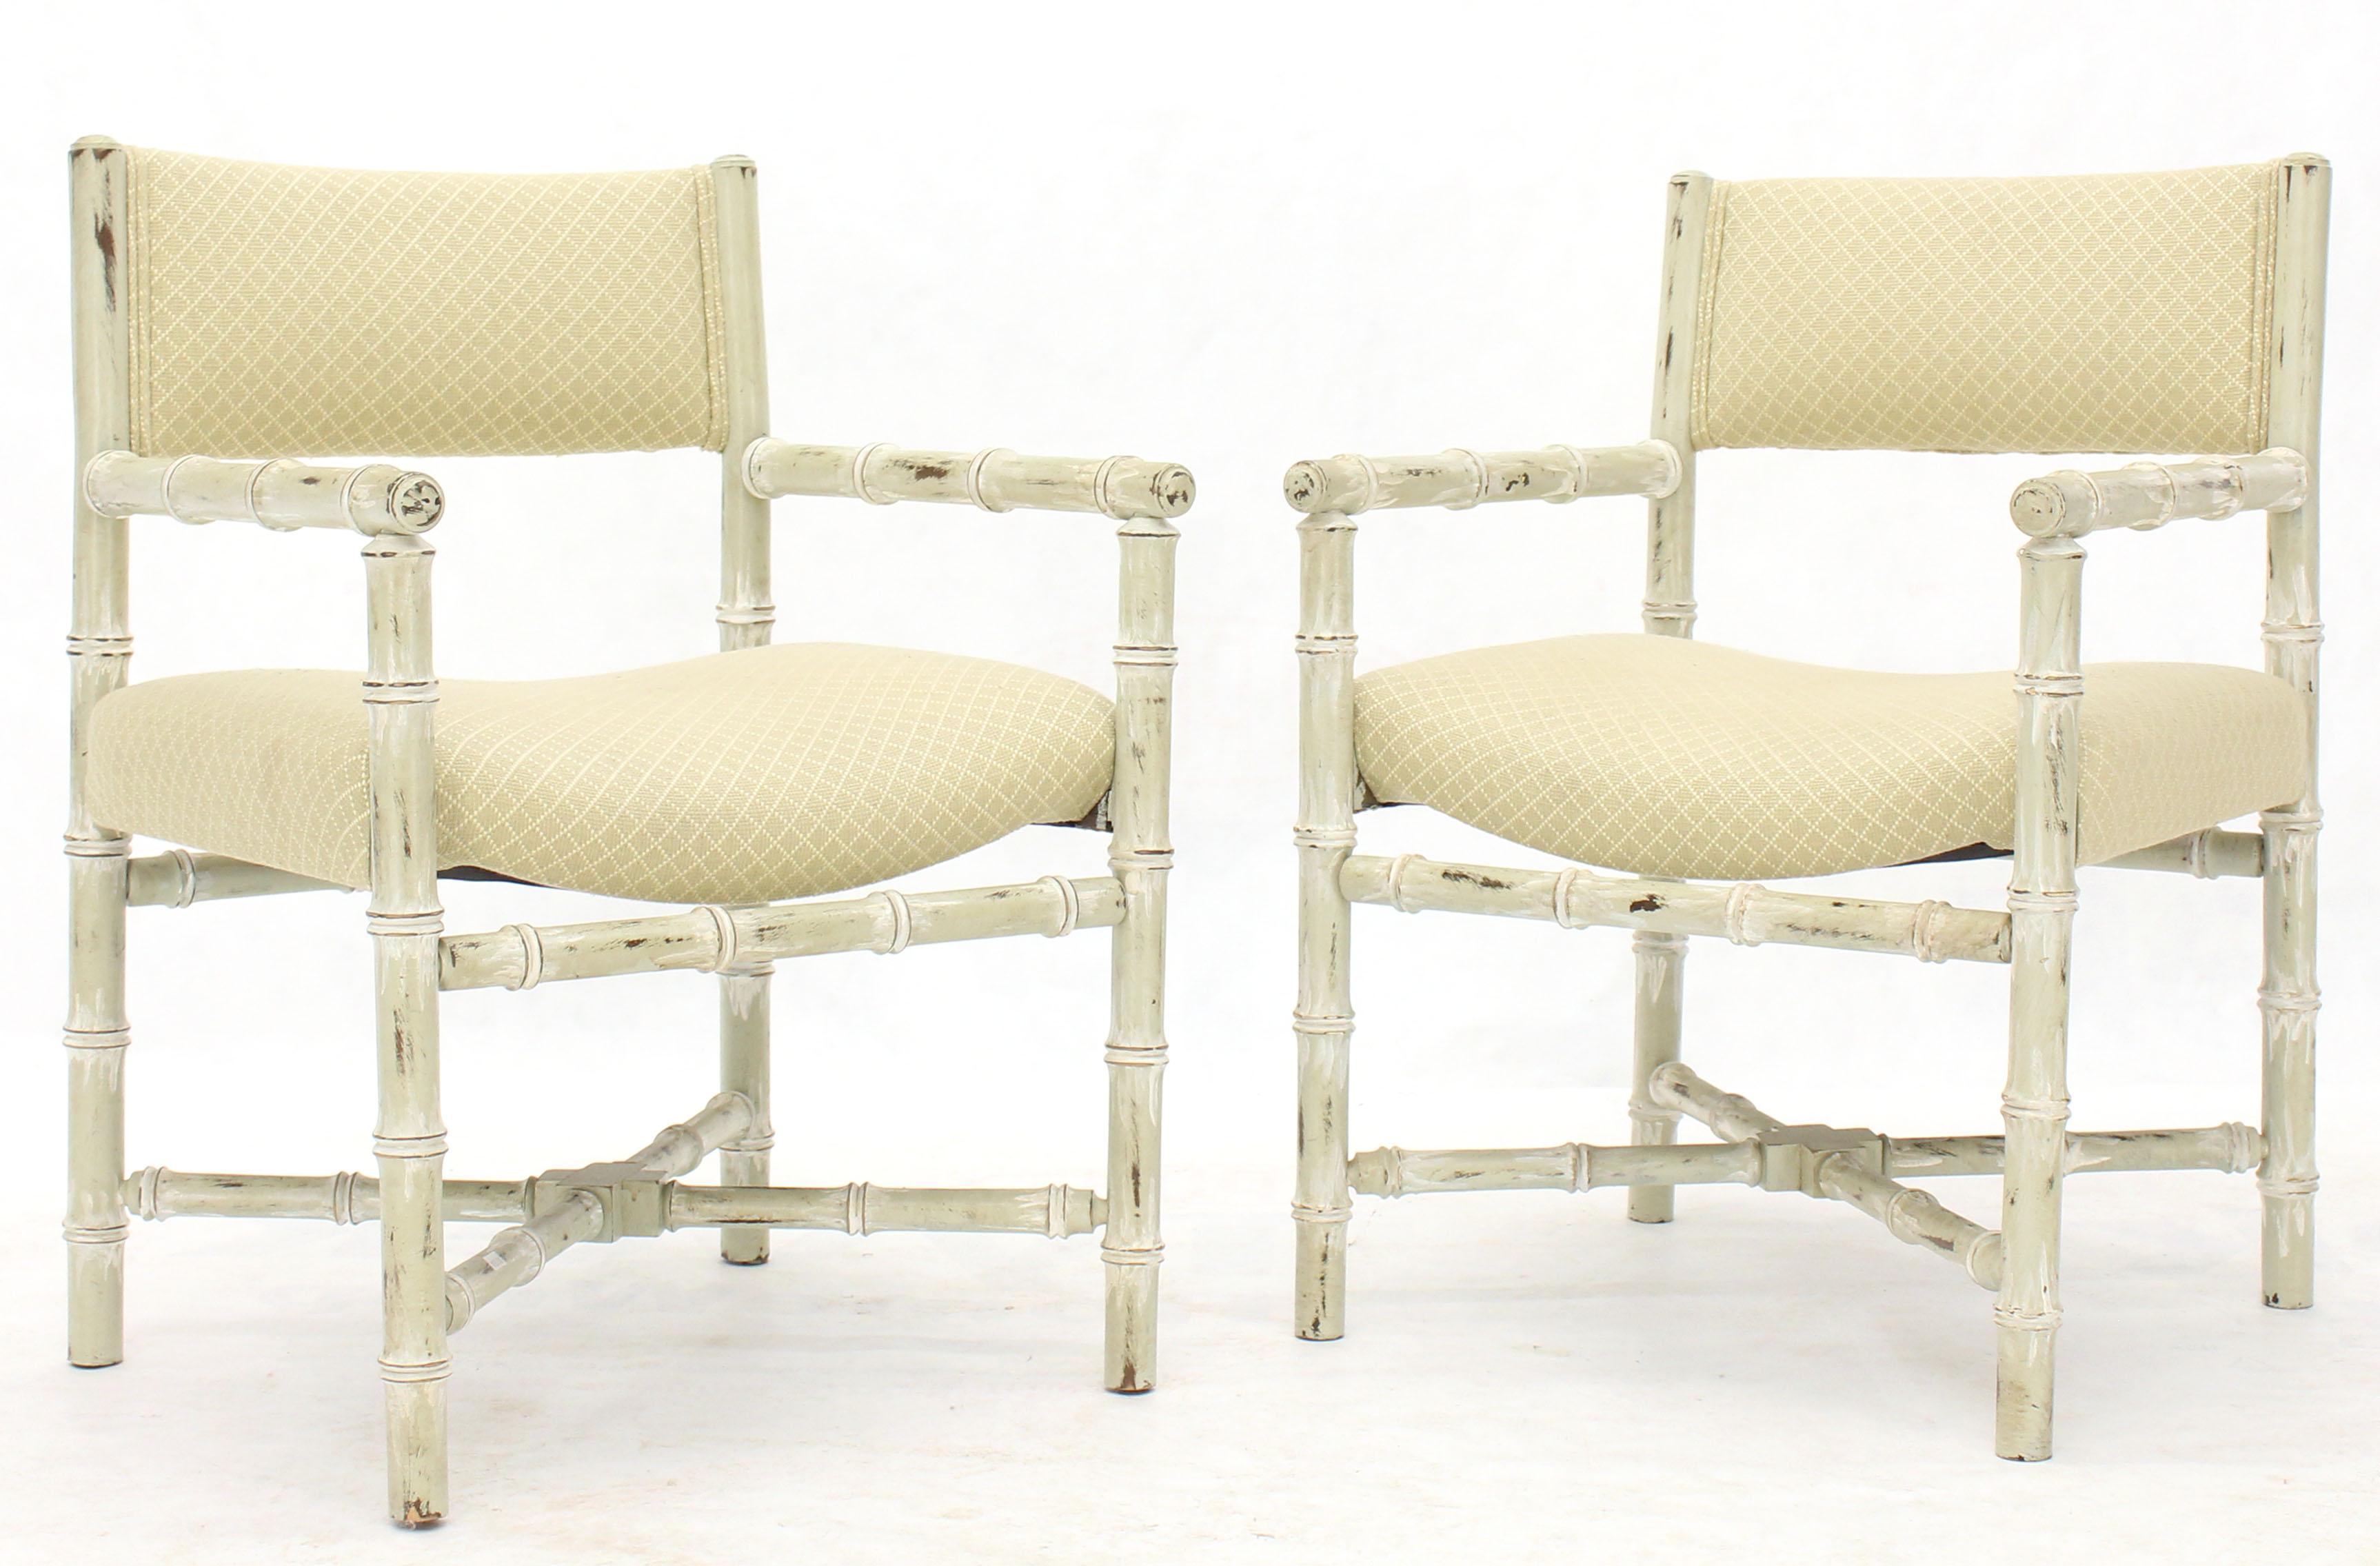 Pair of solid Mid-Century Modern lounge capitan chairs in distressed white finish and X bases. Baker or Drexel style and quality pieces.
 